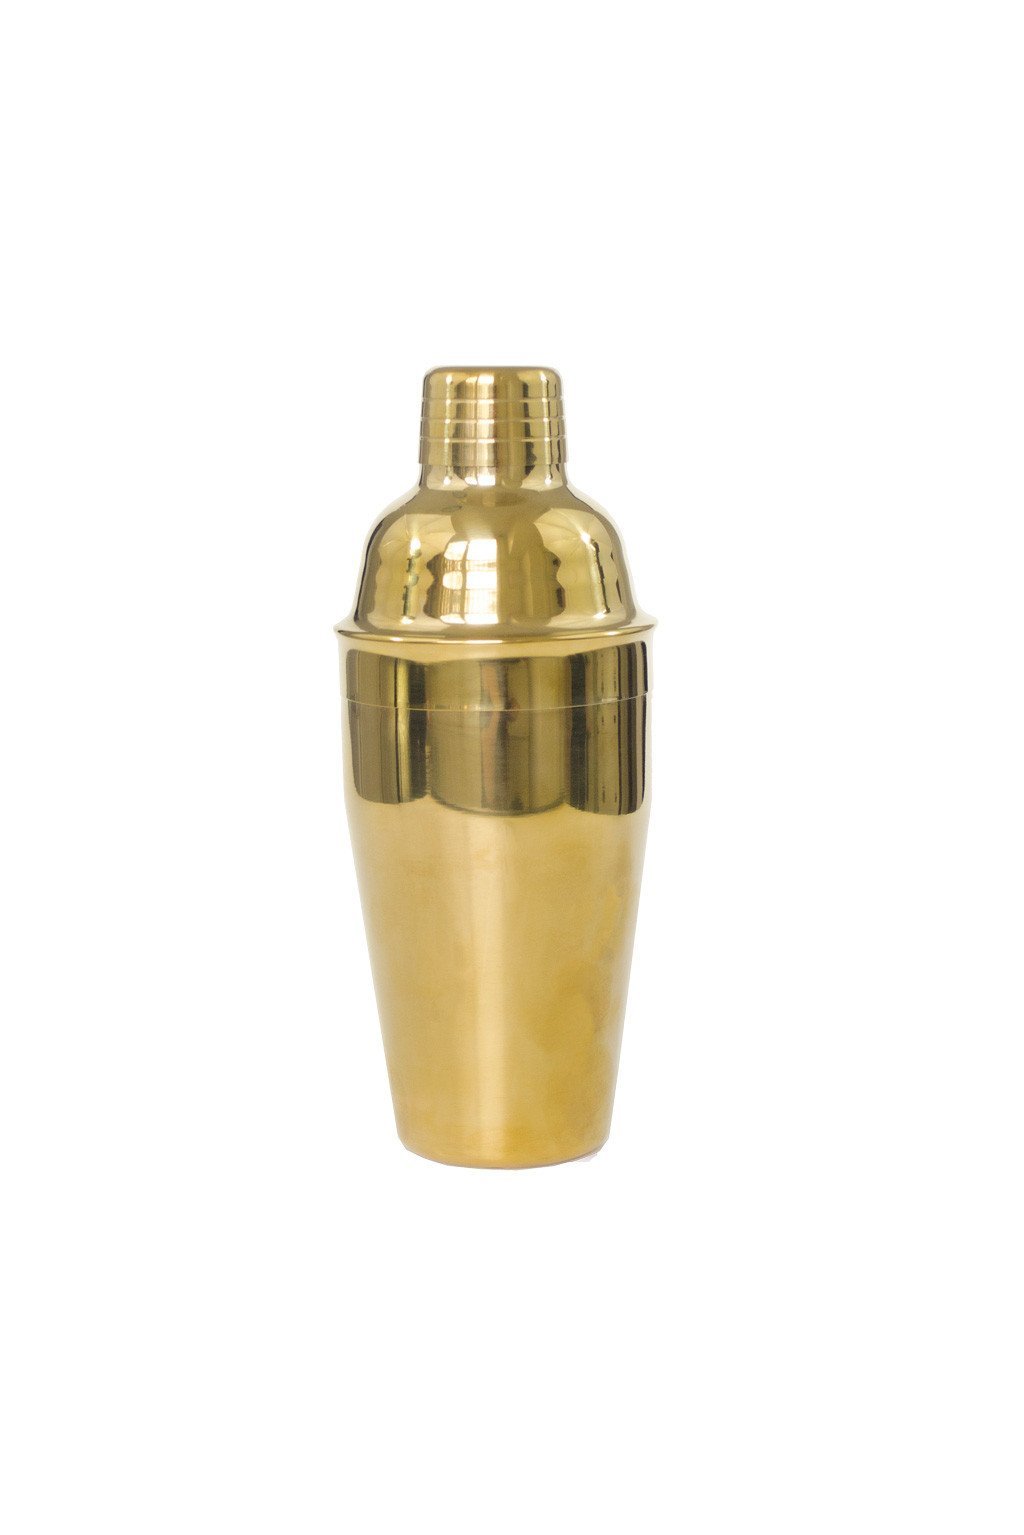 Polished Brass Cocktail Shaker - Two Penny Blue